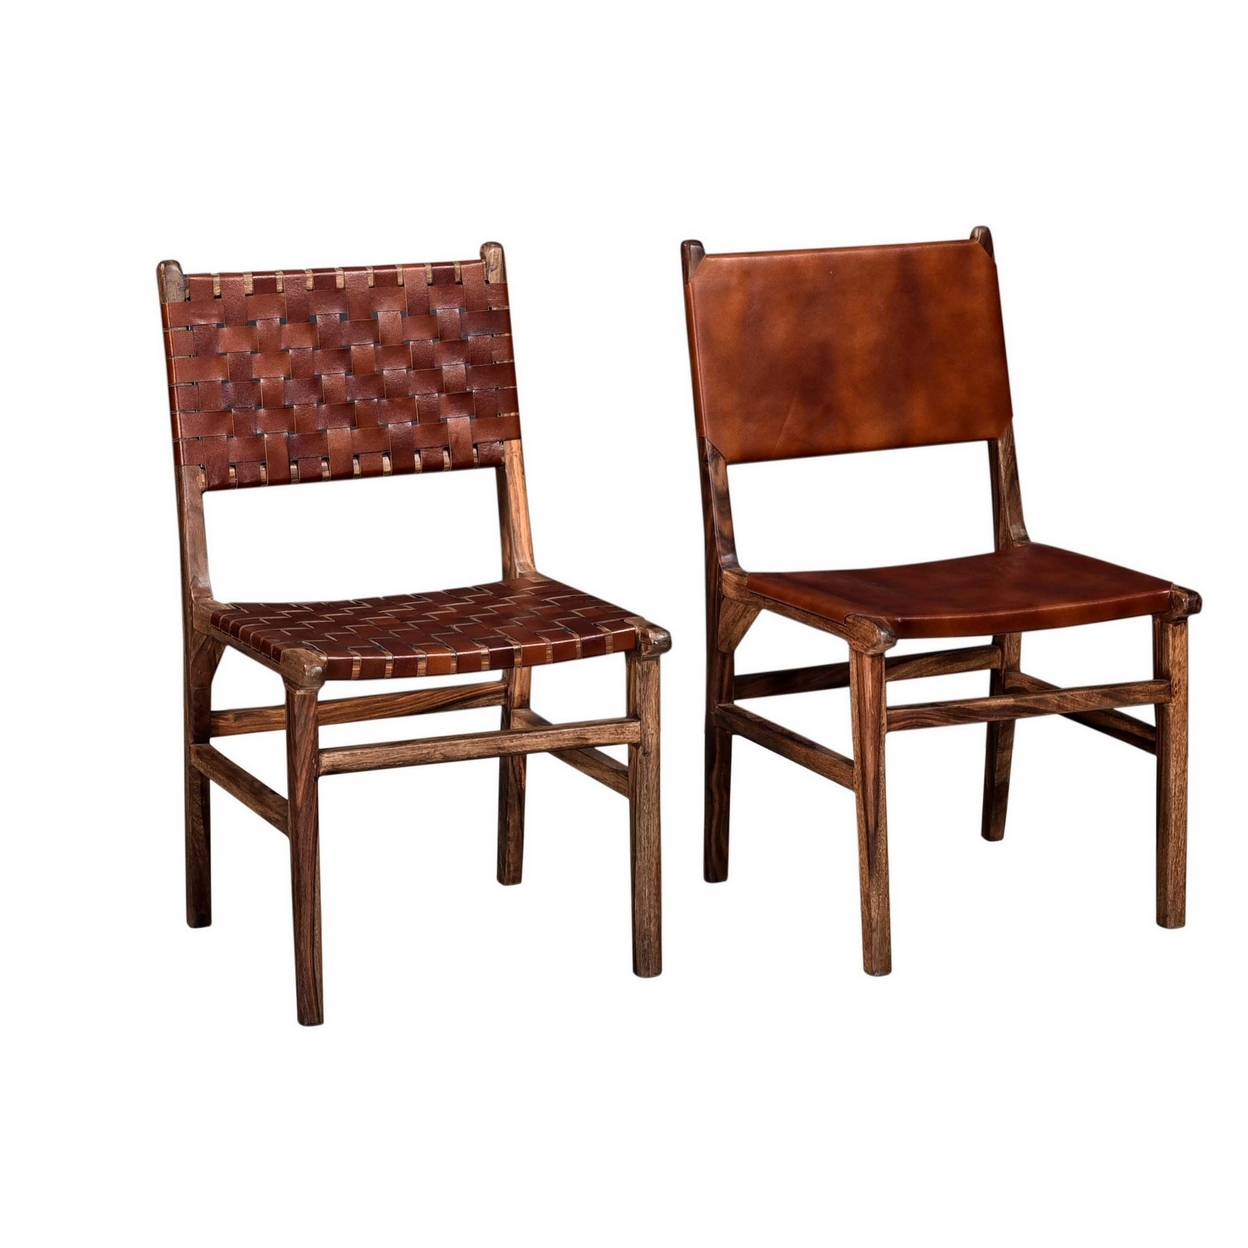 34 Inch Set Of 2 Wood Dining Chairs, Leather Woven Back And Seat, Brown- Saltoro Sherpi